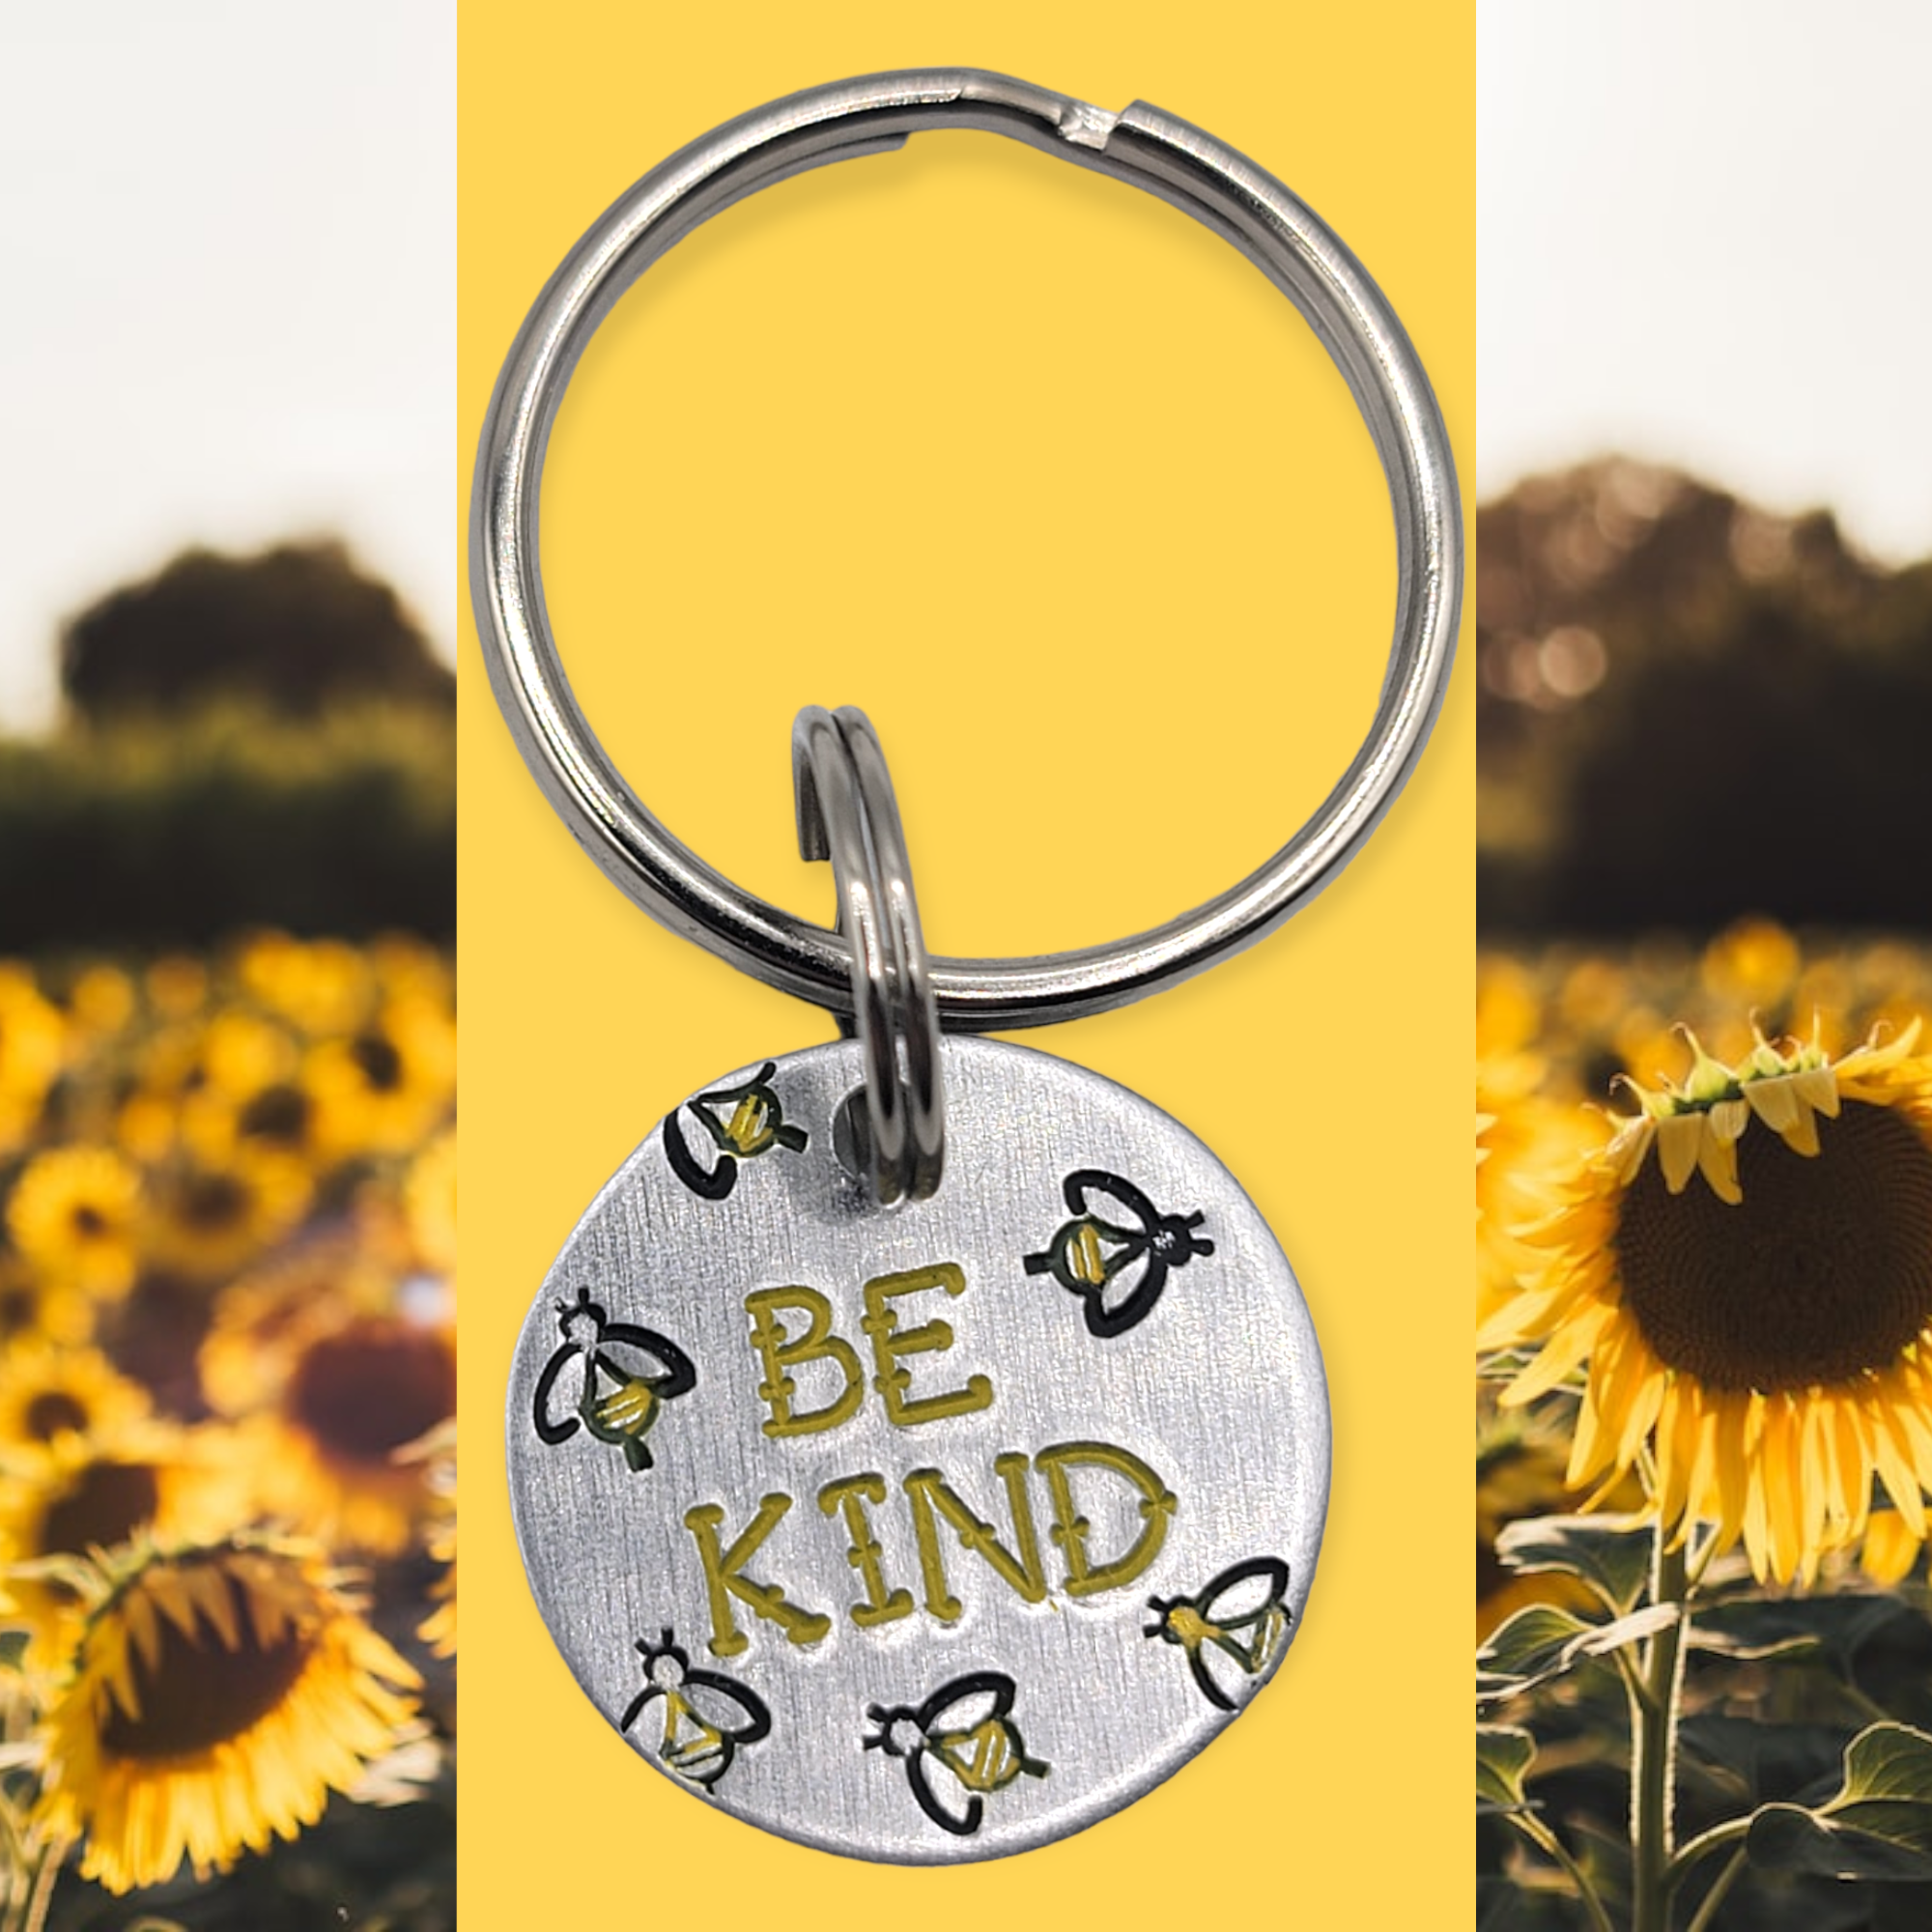 Be Kind Keychain - Travelers Trade Post